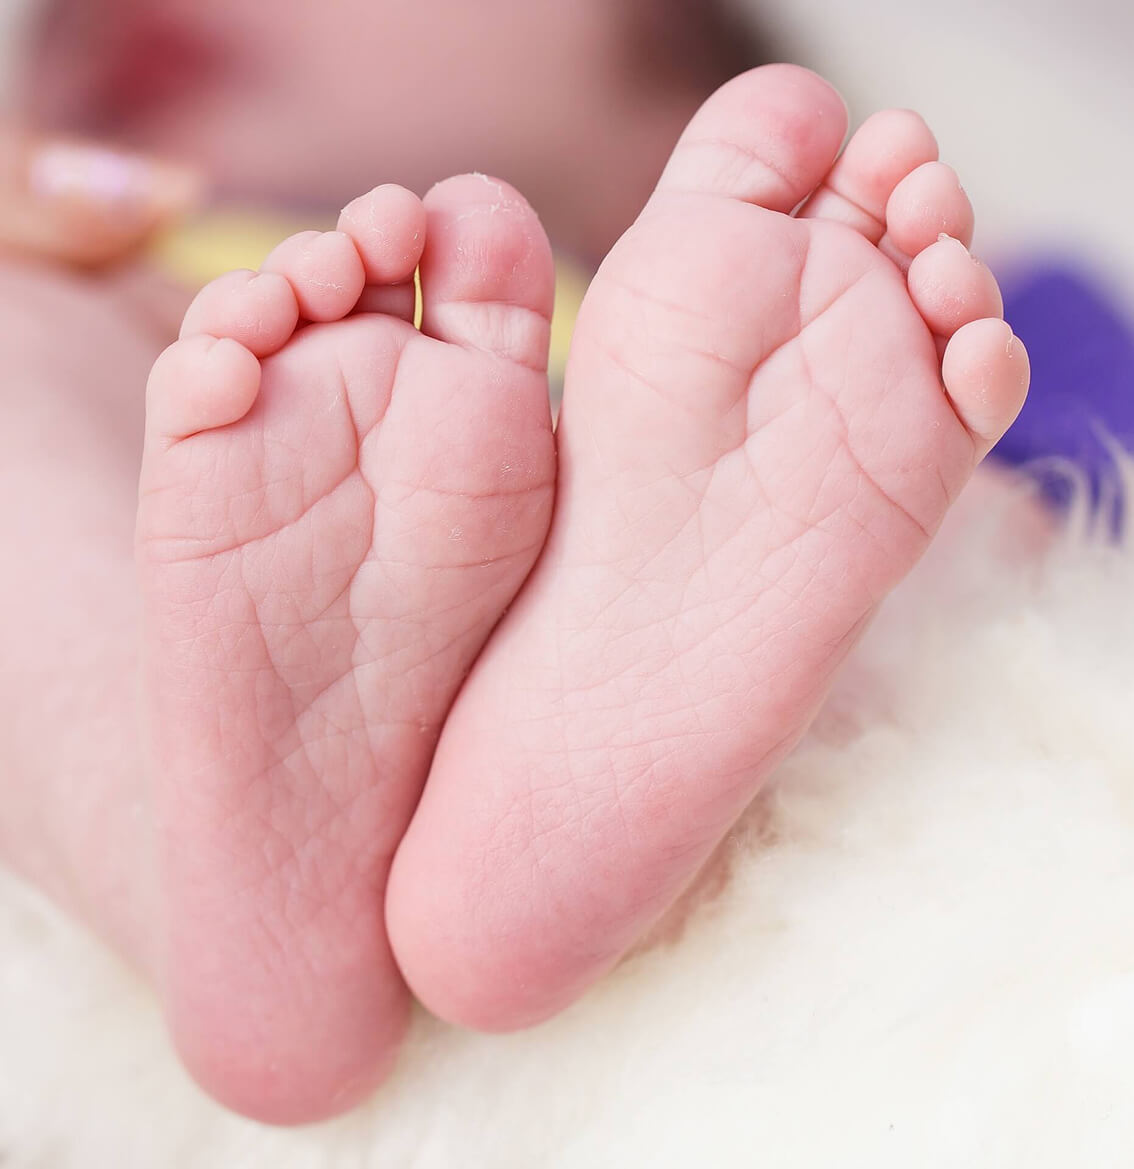 A pair of infant feet